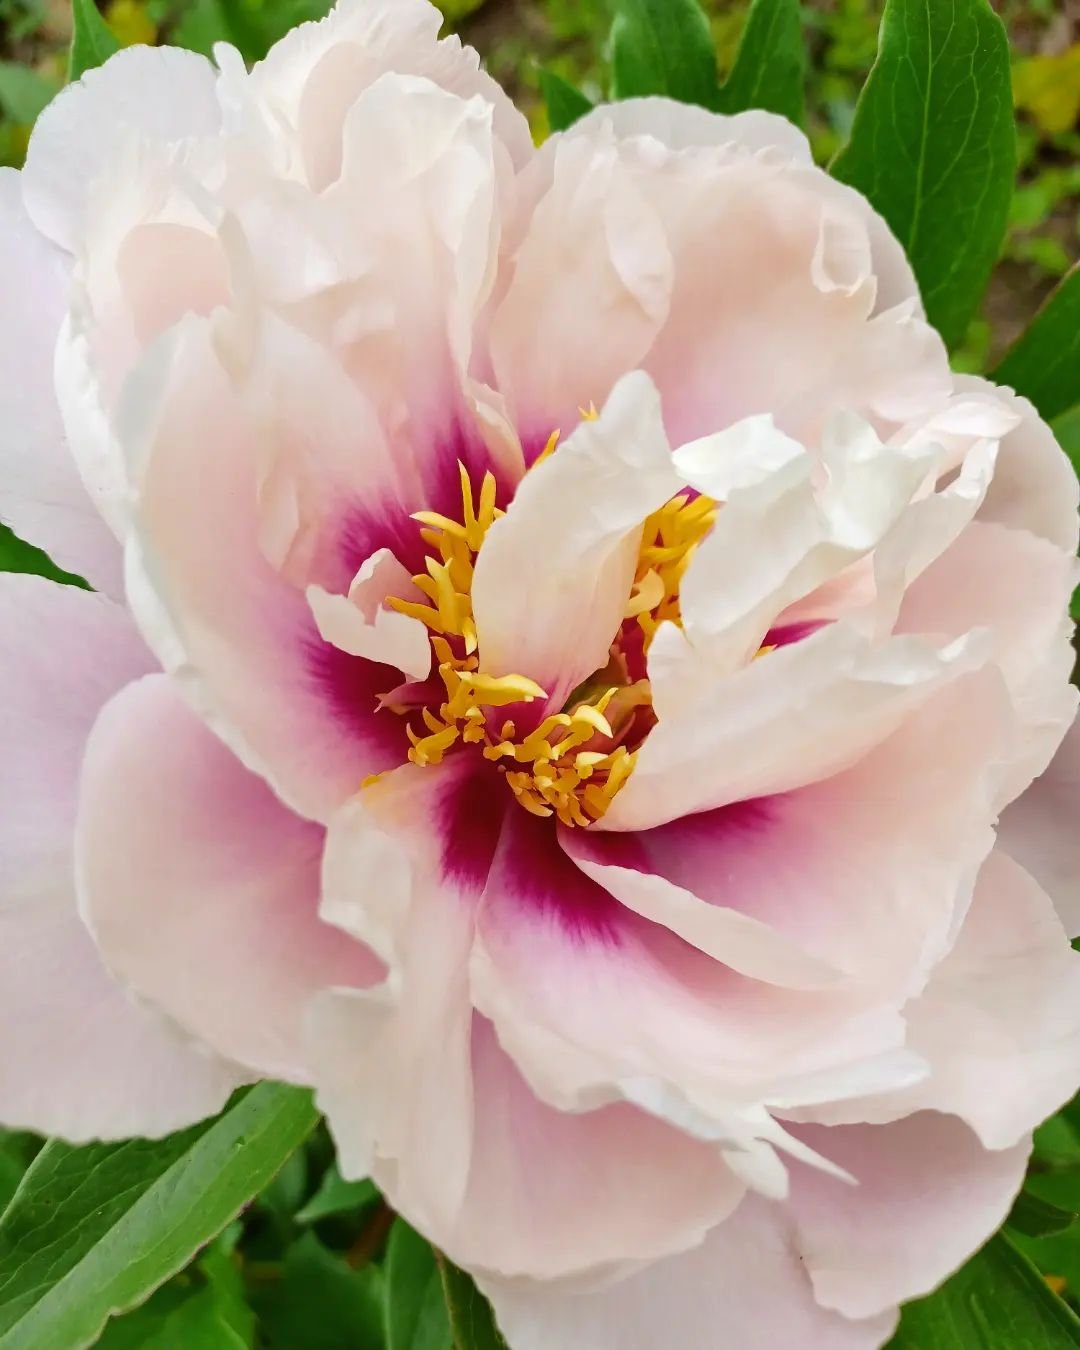 It's peony season!

This morning, I watched my First Arrival Itoh peony open its first bloom.

You can see in these photos that this peony has pale pink petals with dark red in the center.

There are many more peony buds in my garden that will open s